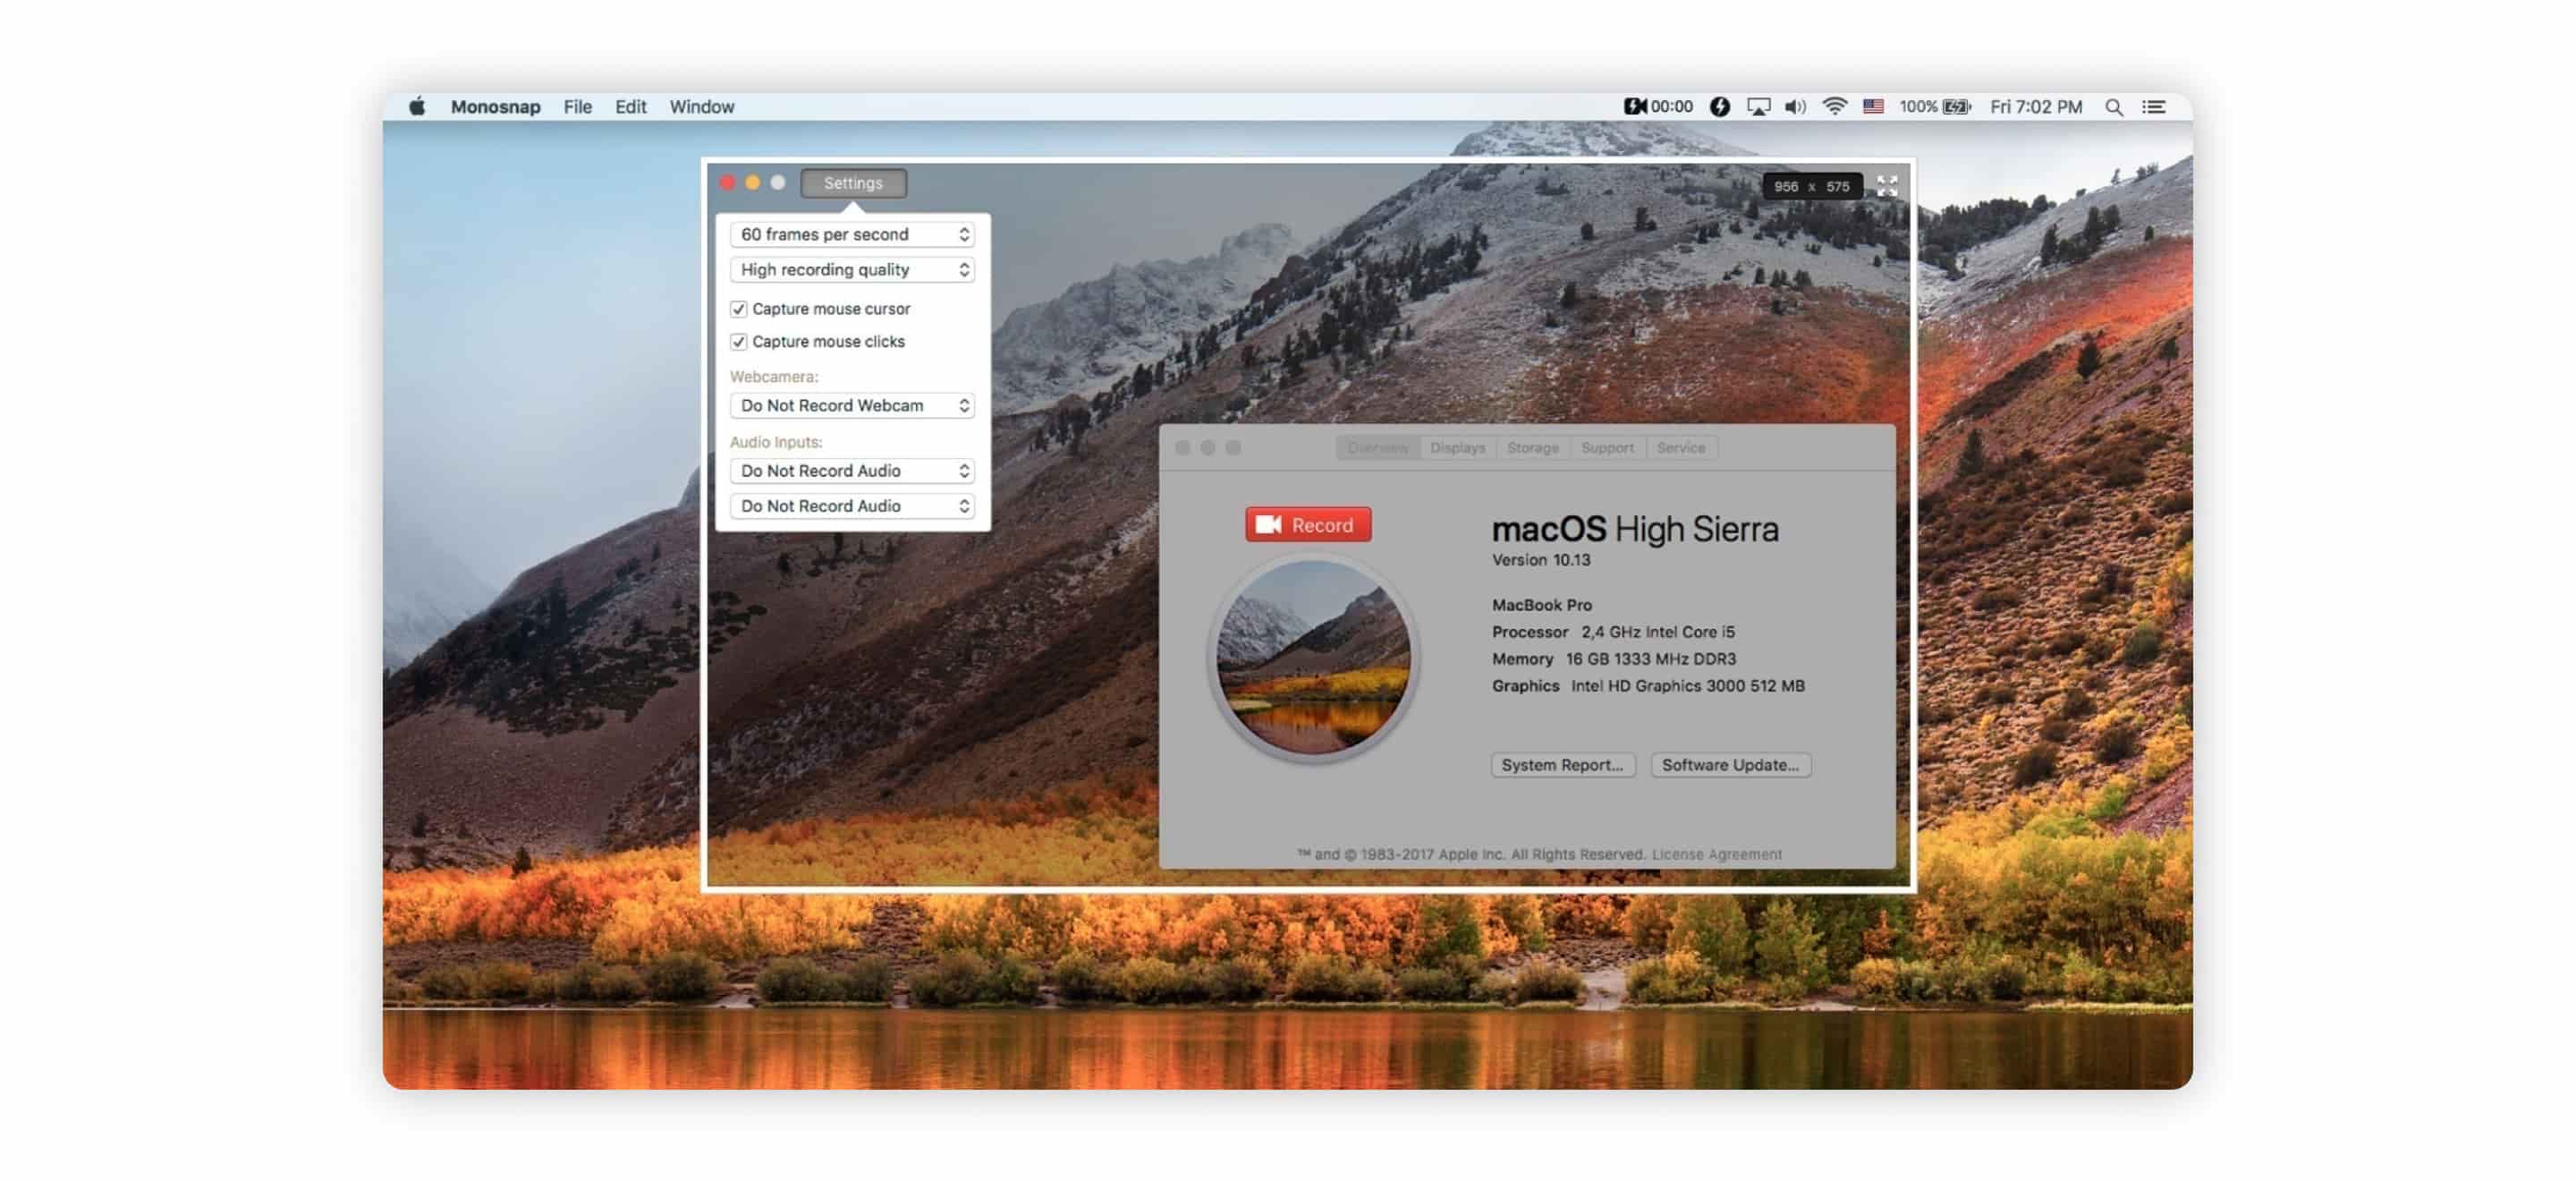 monosnap one of the best screenshot tools for mac